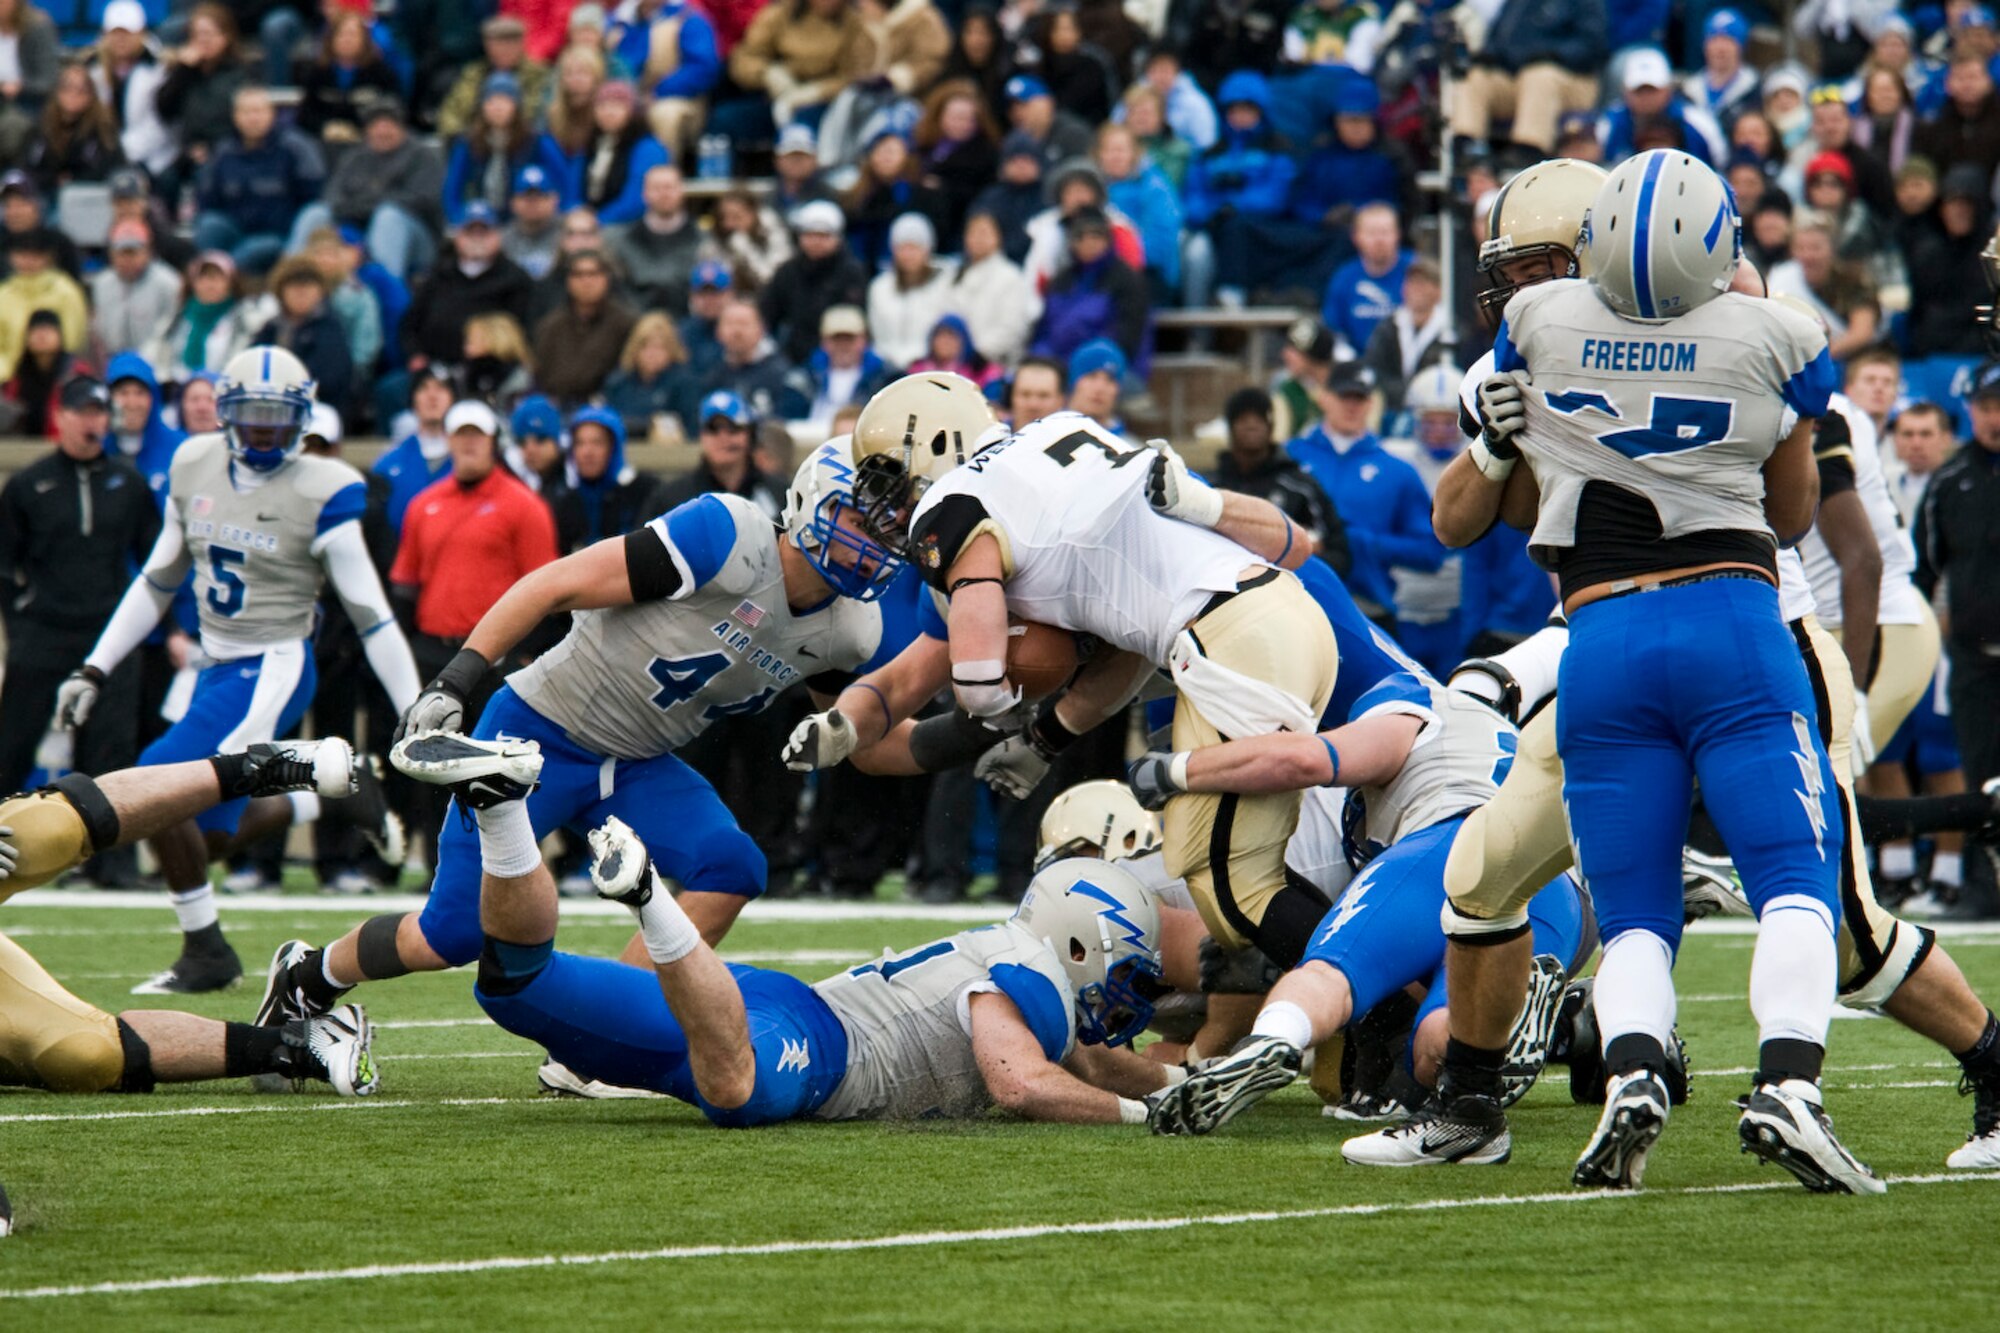 The Air Force Falcons gang tackle an Army Knights running back during the second half of the football game at the Air Force Academy, Colo., Nov. 5, 2011. At halftime the Army Knights were up by two touchdowns 14-0, the second half was dominated by the Falcons which went on a 24-0 run with the final score of 24-14 winning. (U.S. Air Force photo by Airman Alystria Maurer/Released)